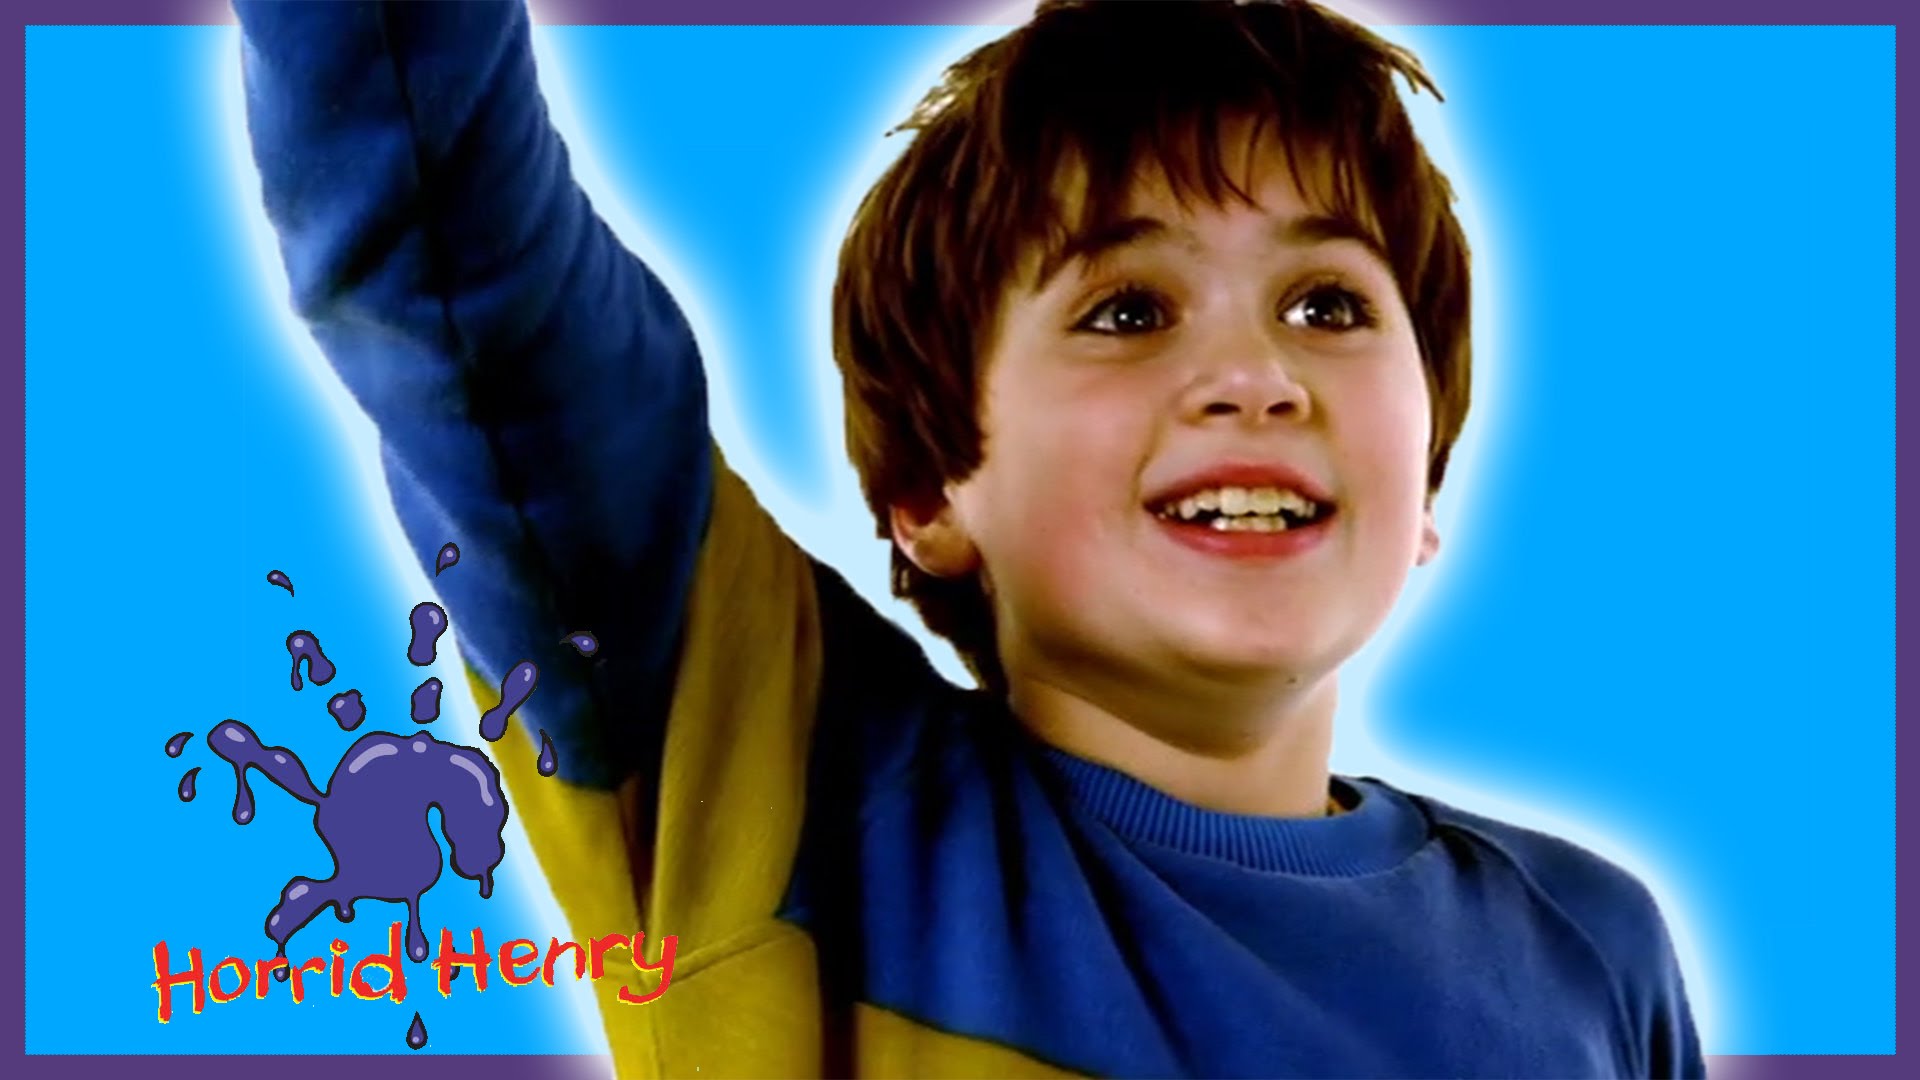 The Student And Mister Henri Movie Wallpapers - Horrid Henry From The Movie , HD Wallpaper & Backgrounds